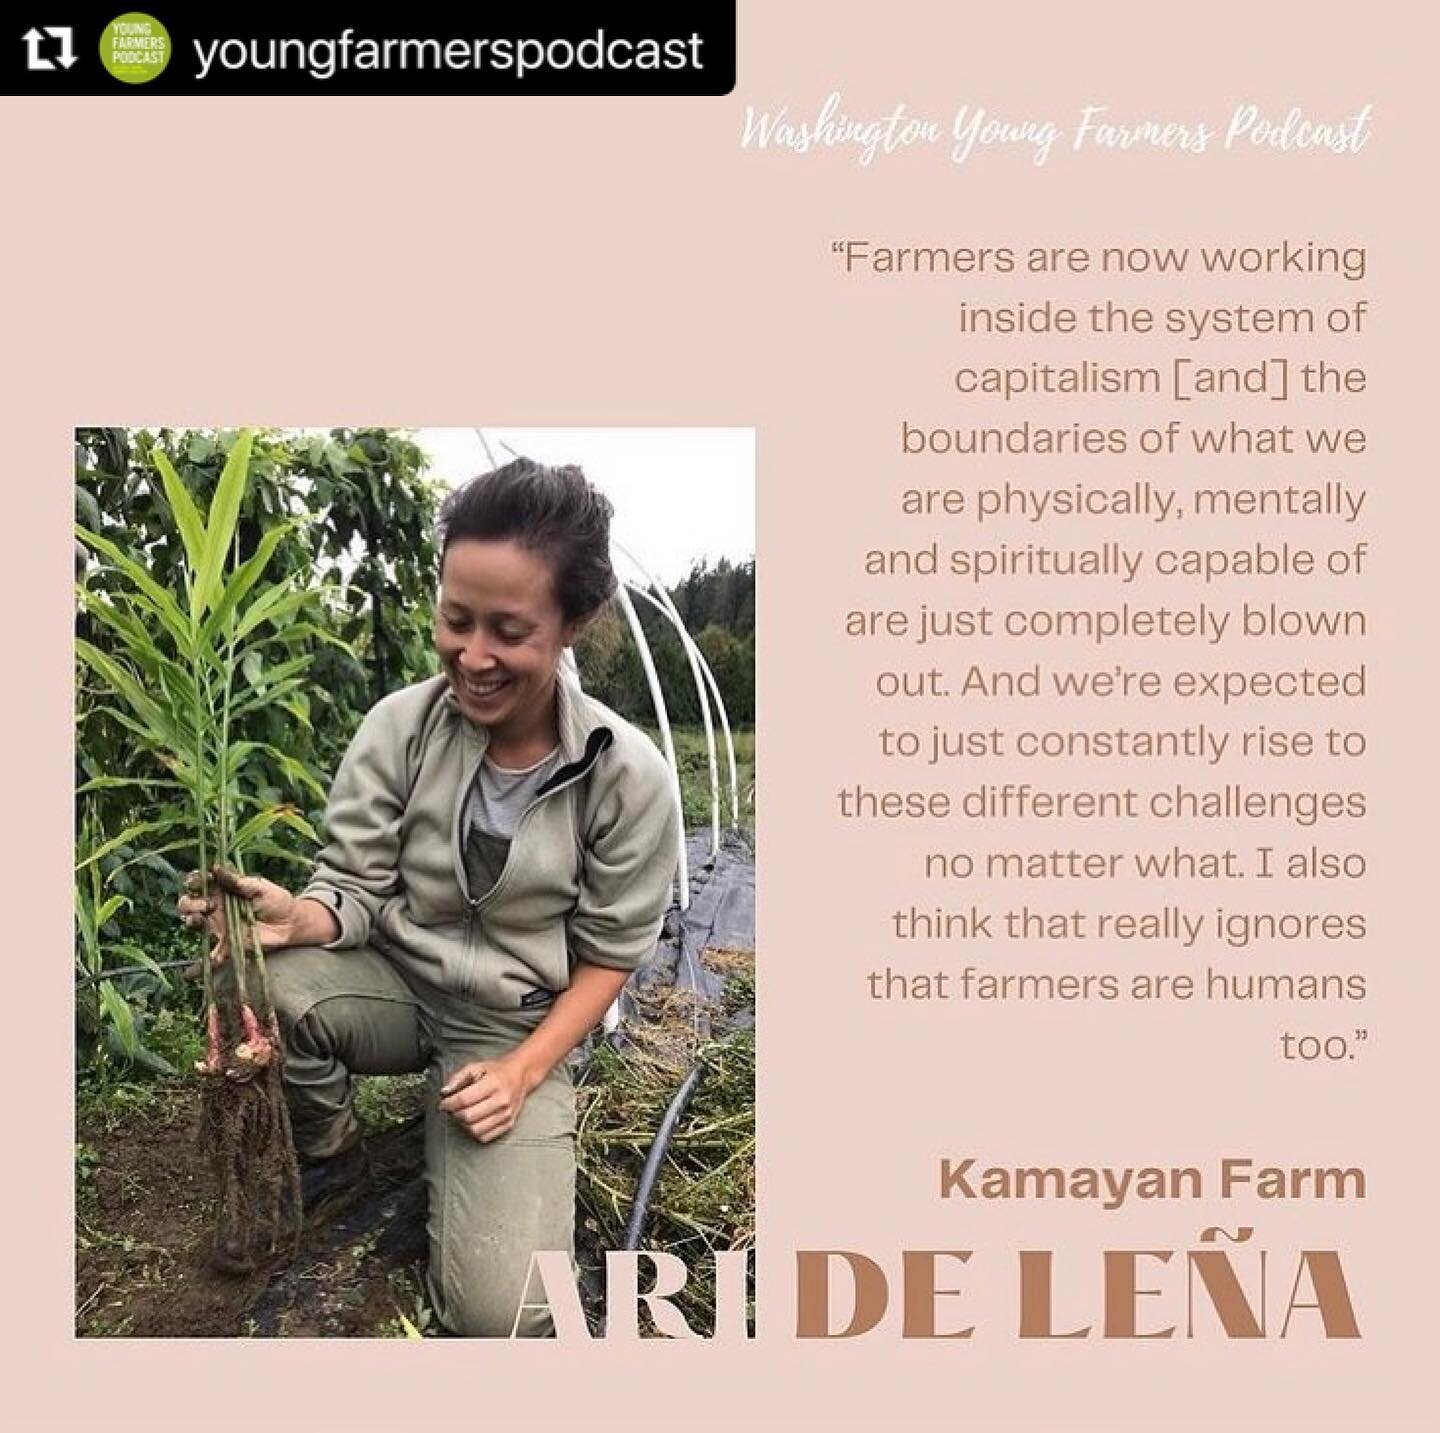 The final two episodes of the @wayoungfarmers series on &ldquo;Farm Resilience and COVID-19&rdquo; is up! In both episodes Elizabeth spoke with Ariana de Leña, a farmer at @kamayanfarm&nbsp;located east of Seattle. In part one, Elizabeth and Ariana 